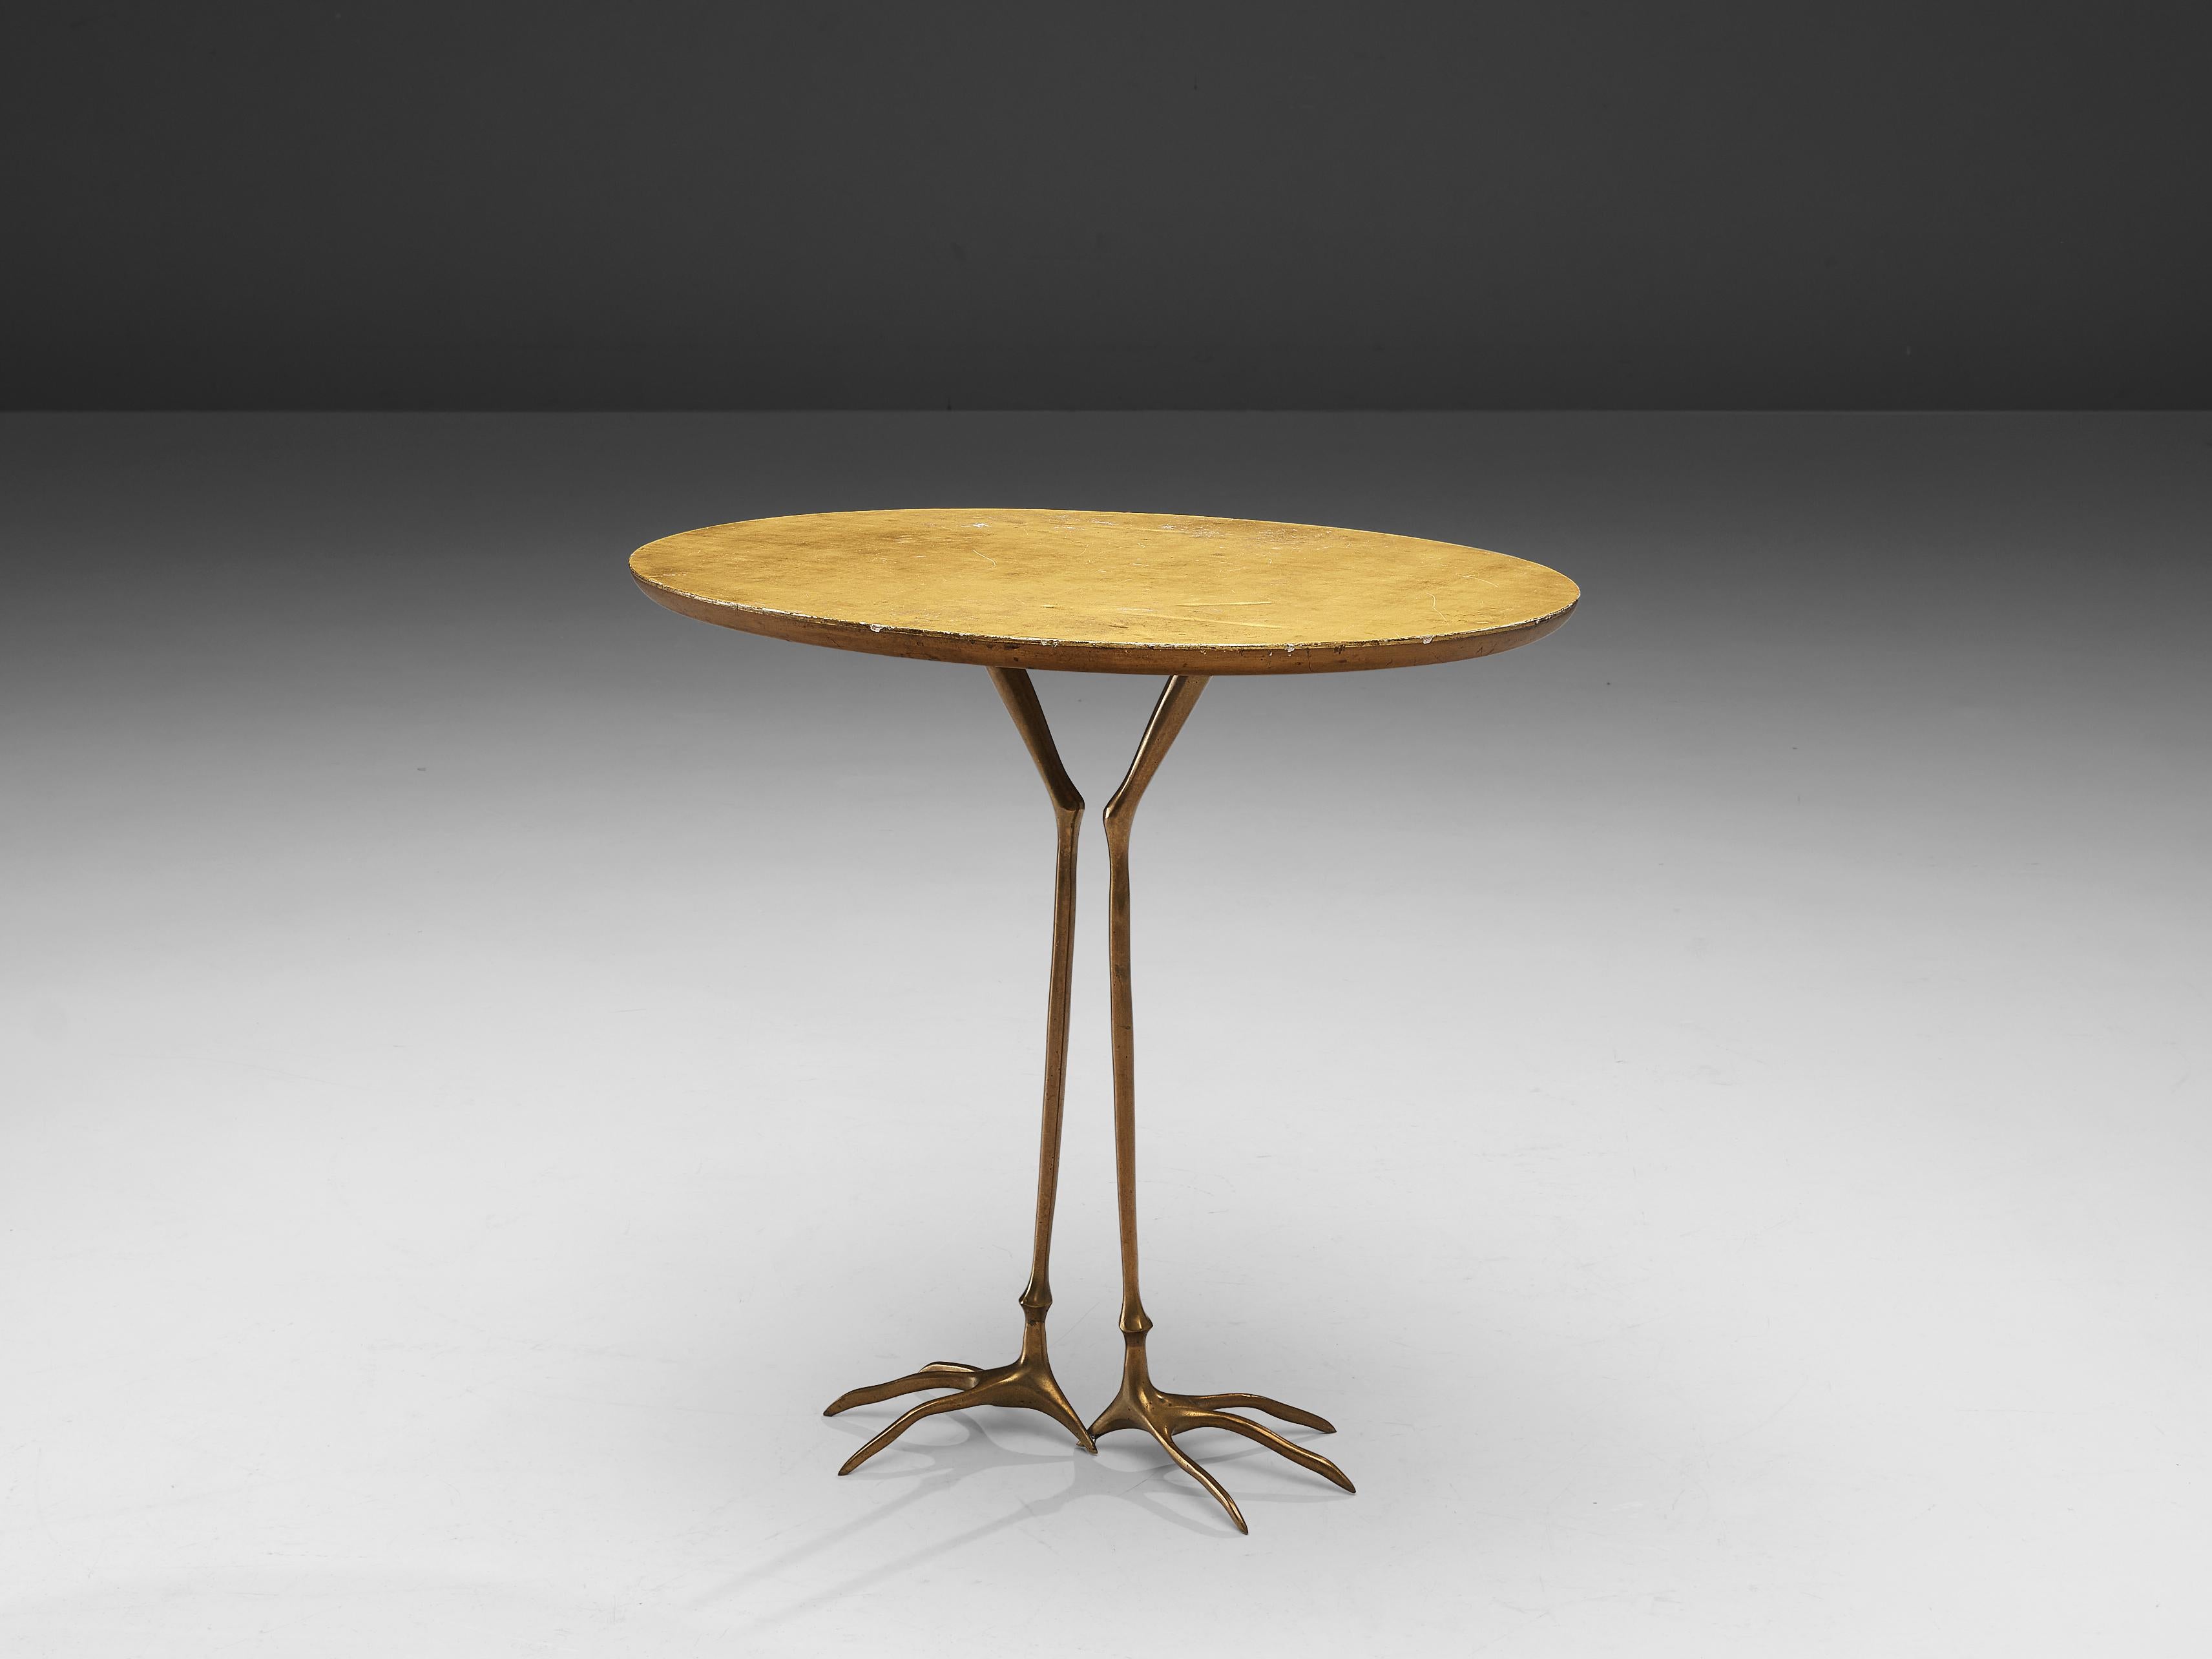 Meret Oppenheim, 'Traccia' coffee table, gilded wood, brass, Italy, design 1939 

This surrealistic side table is designed by one of the most renowned Surrealist artists Meret Oppenheim (1913-1985). The gilded wood top is in the shape of a golden